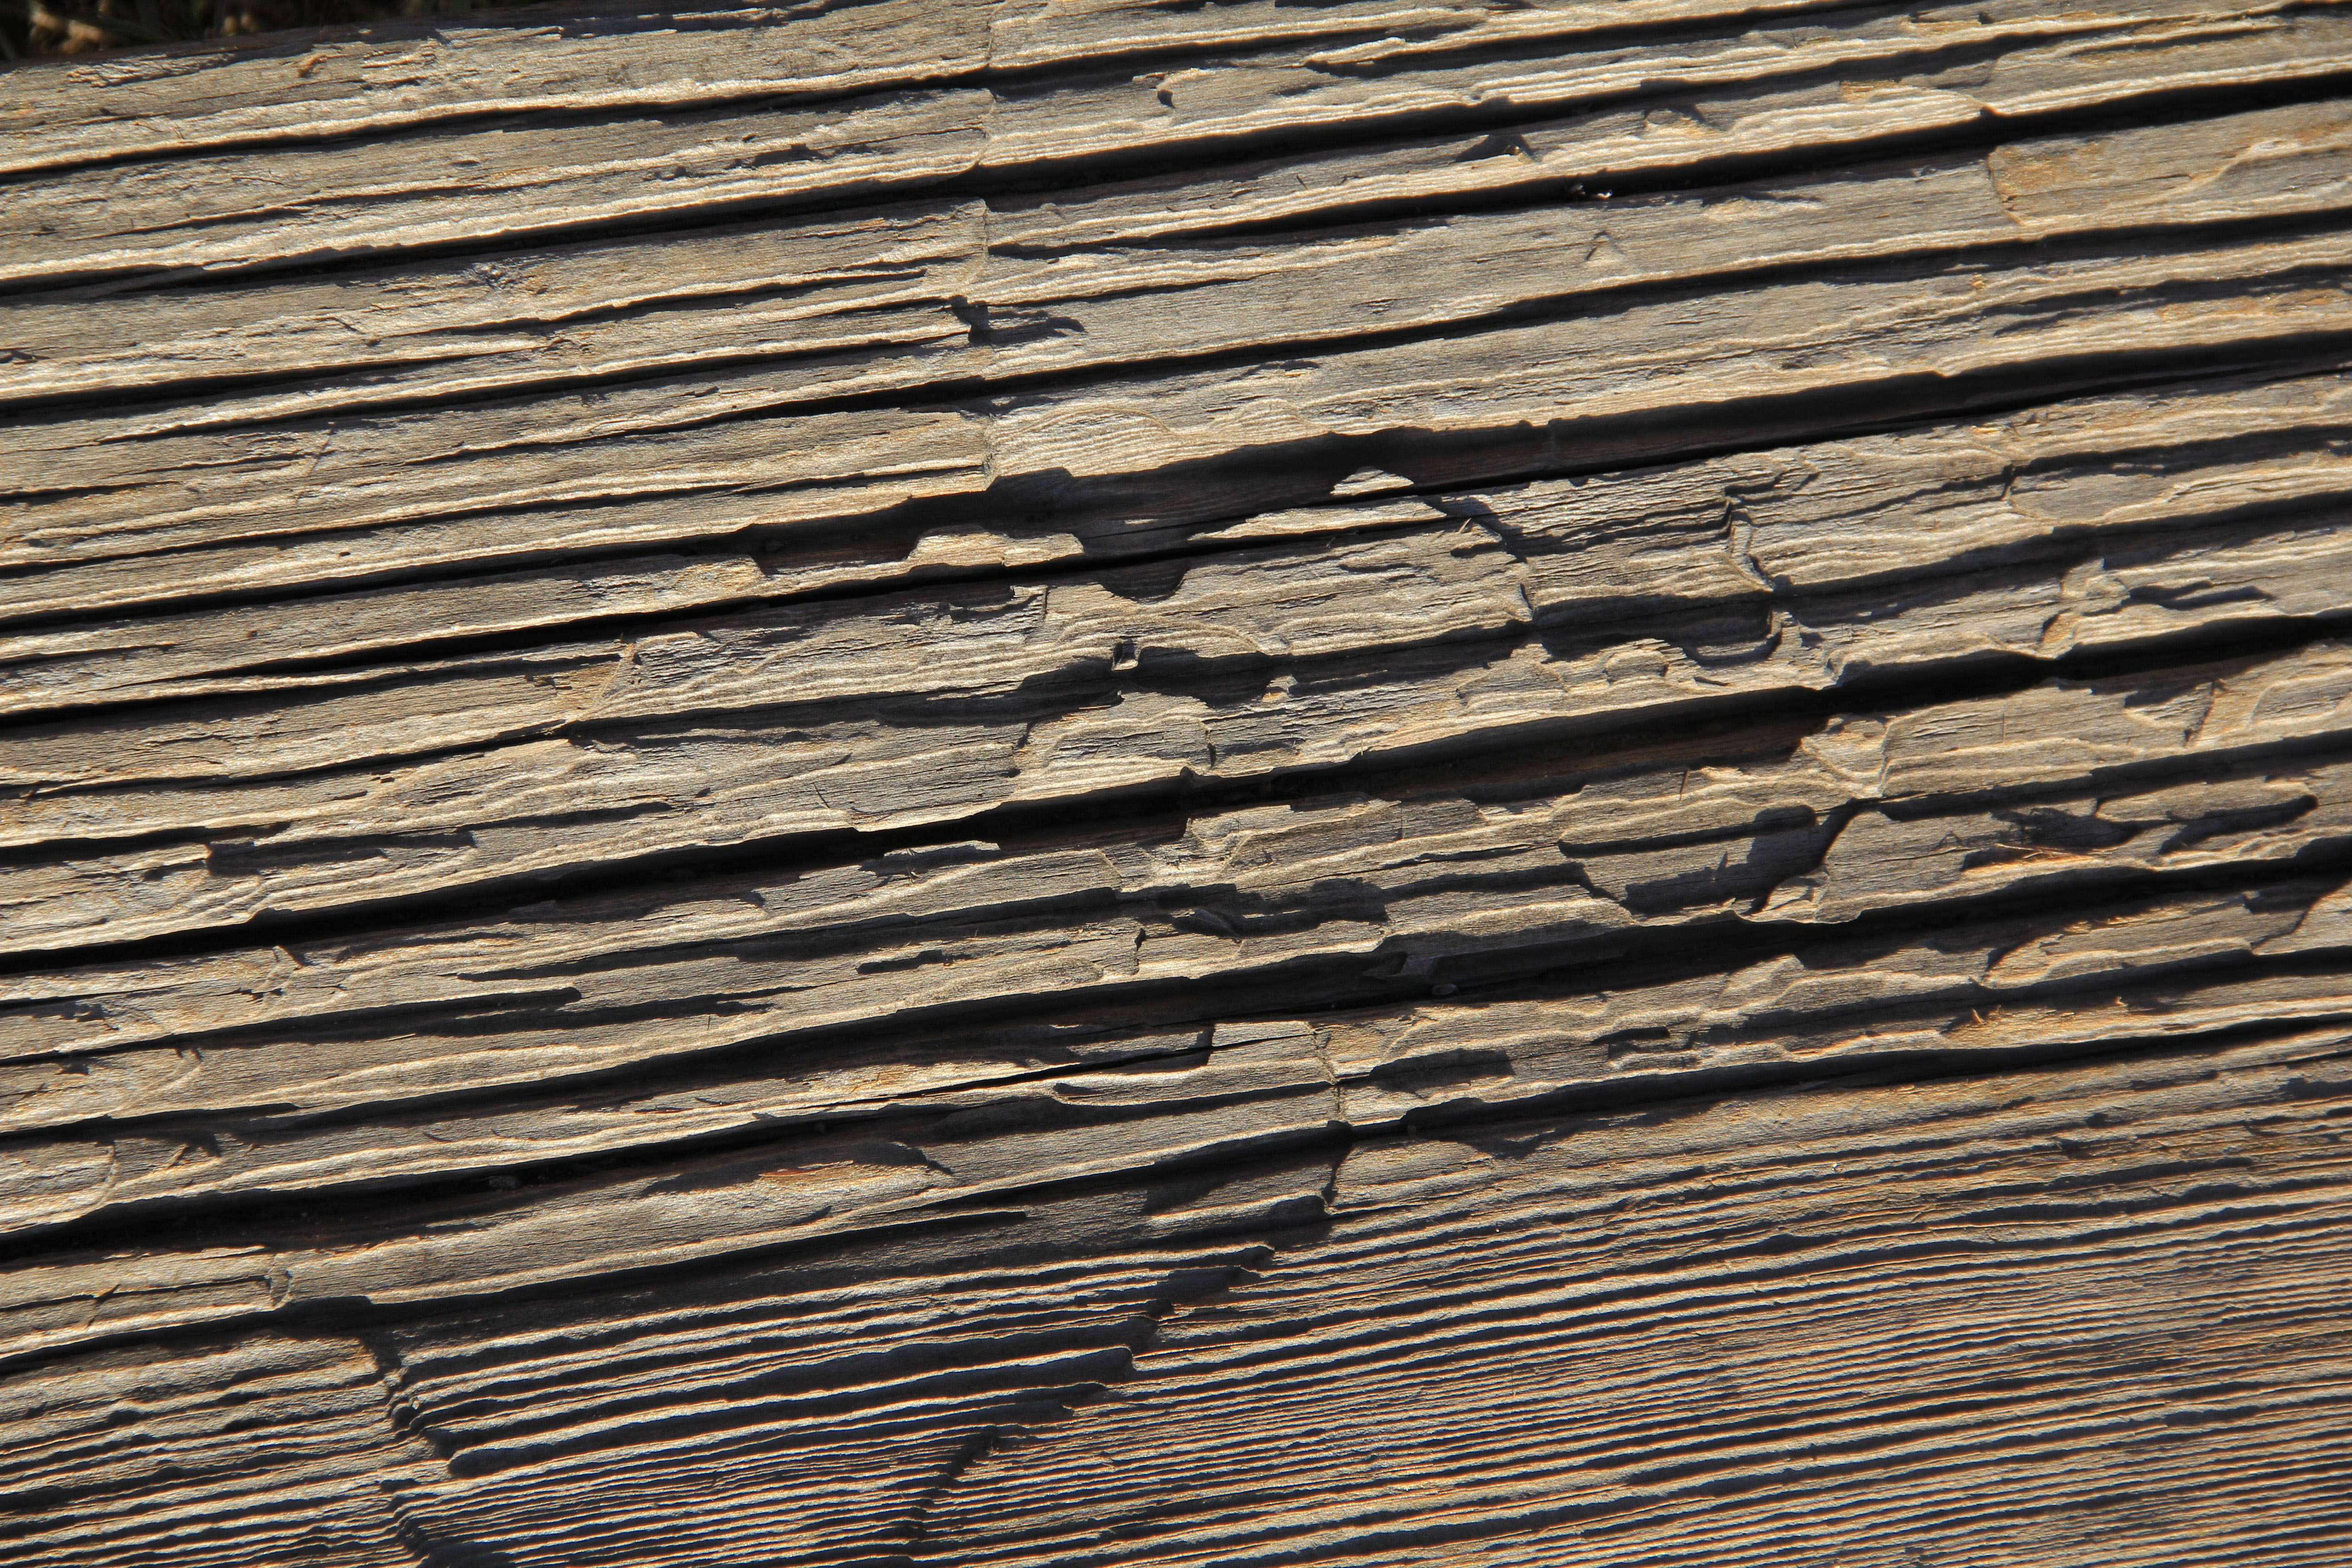 Wood Textures Archives - Page 4 of 10 - TextureX- Free and premium ...